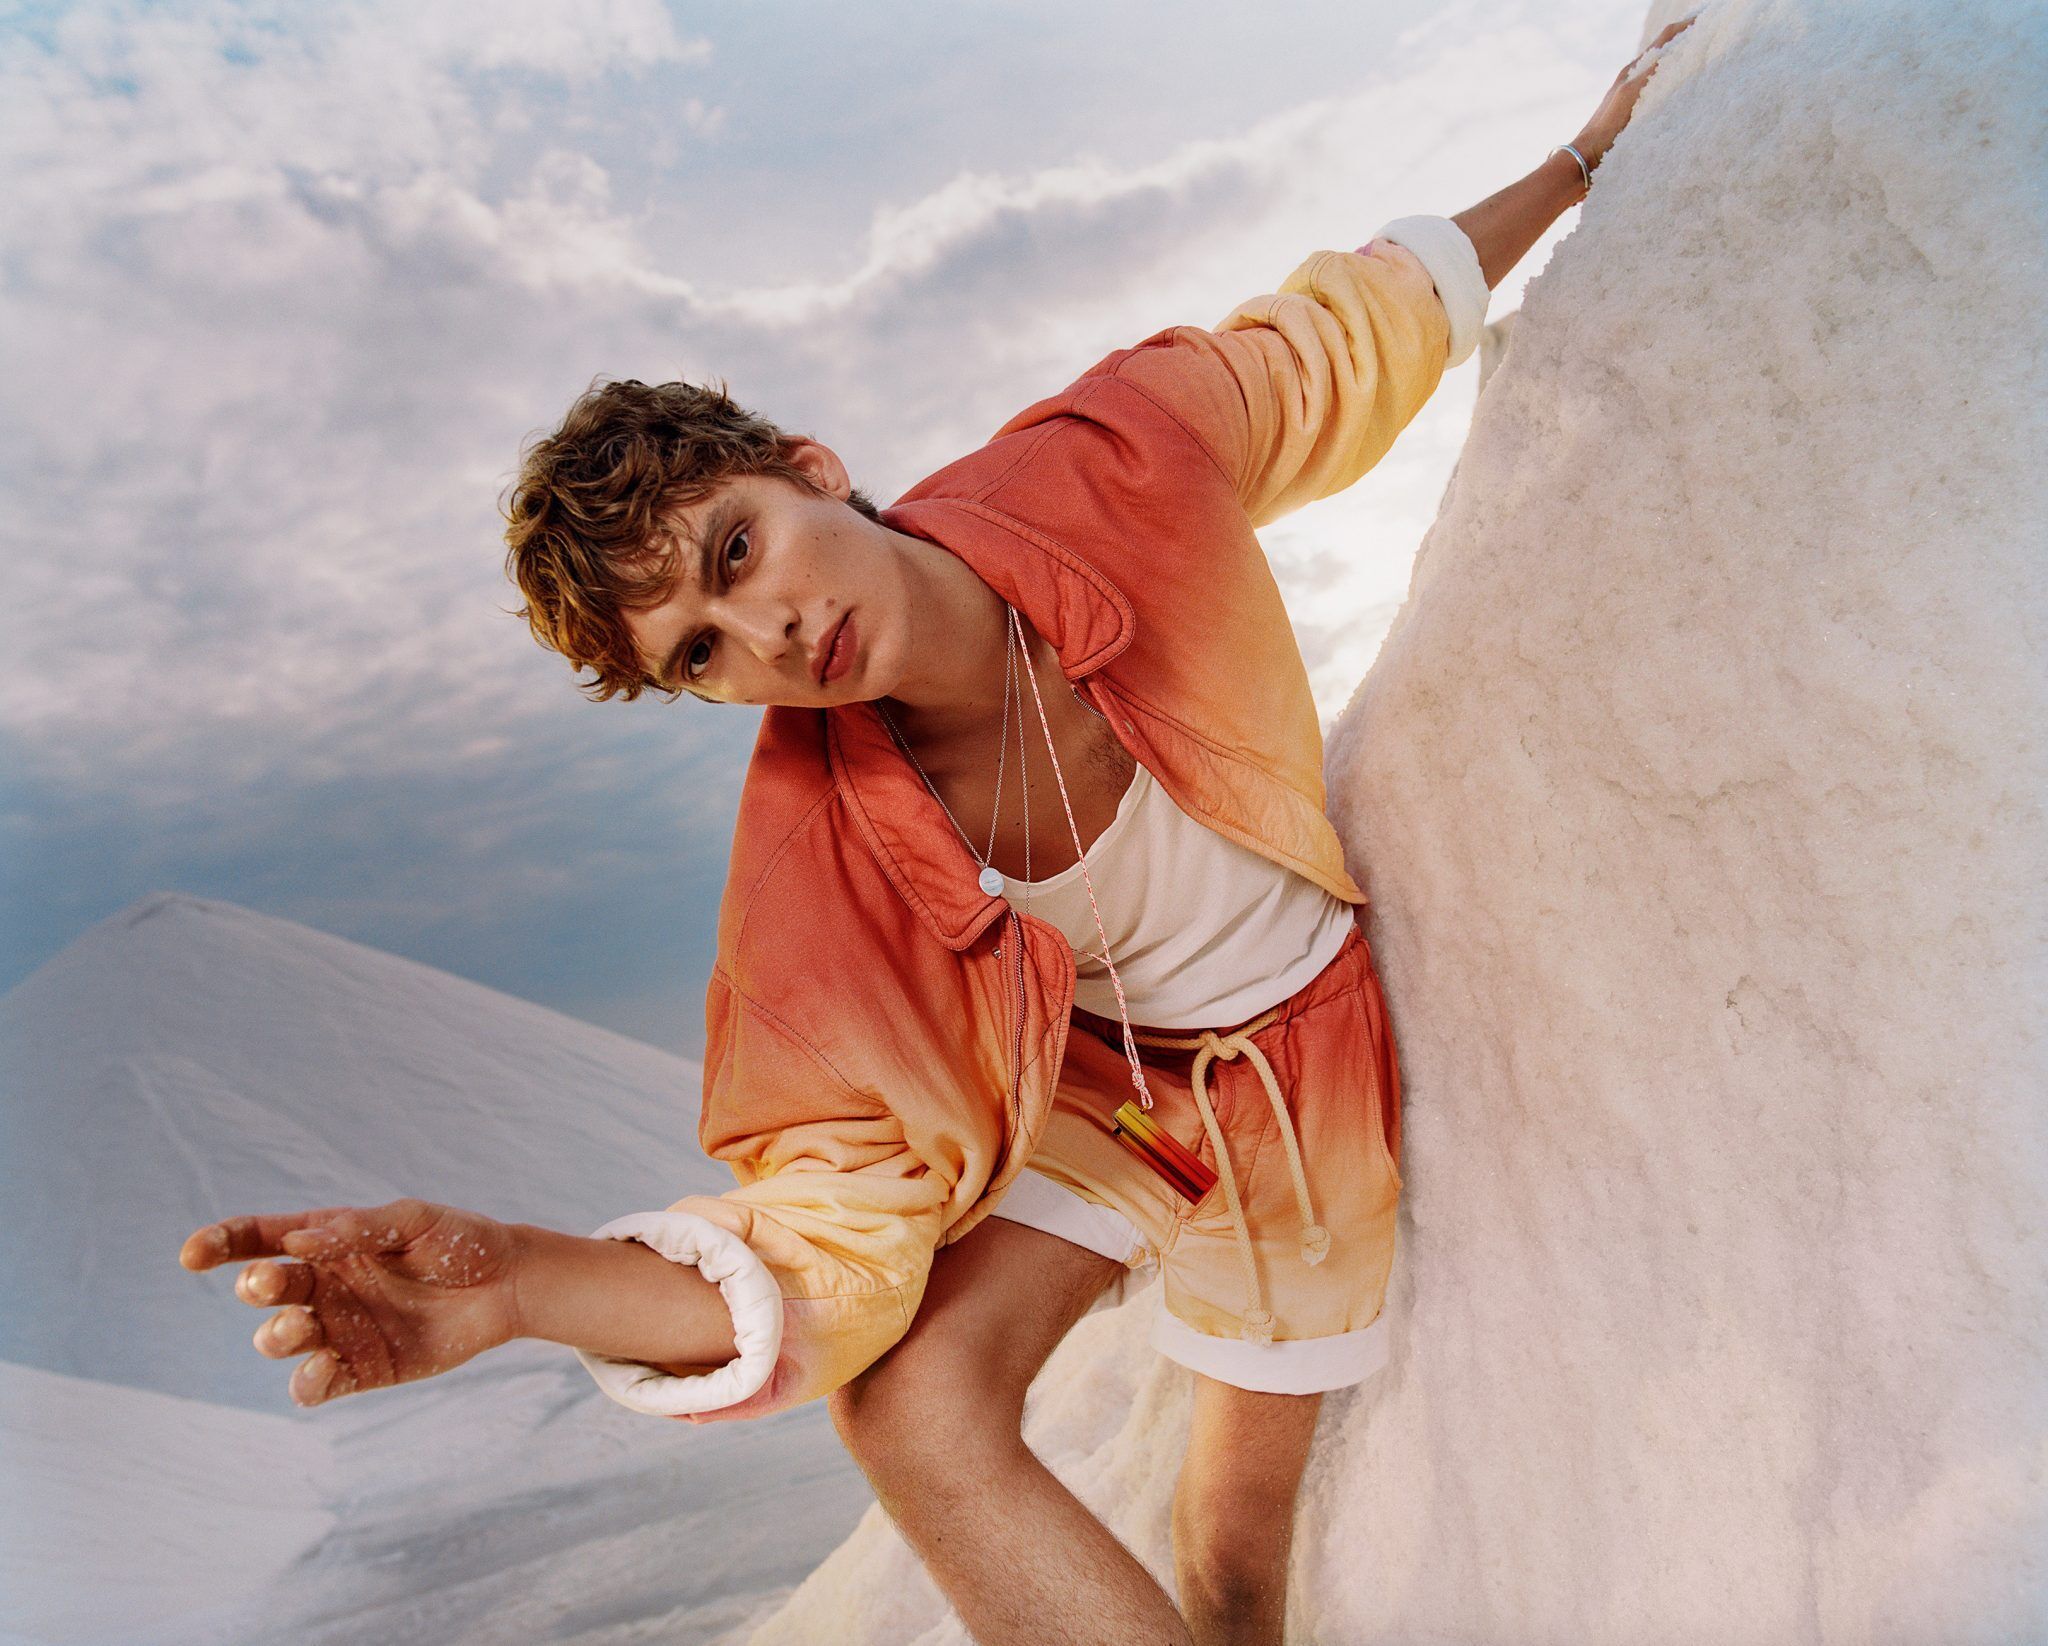 Isabel Marant Spring 2022 Ad Campaign 